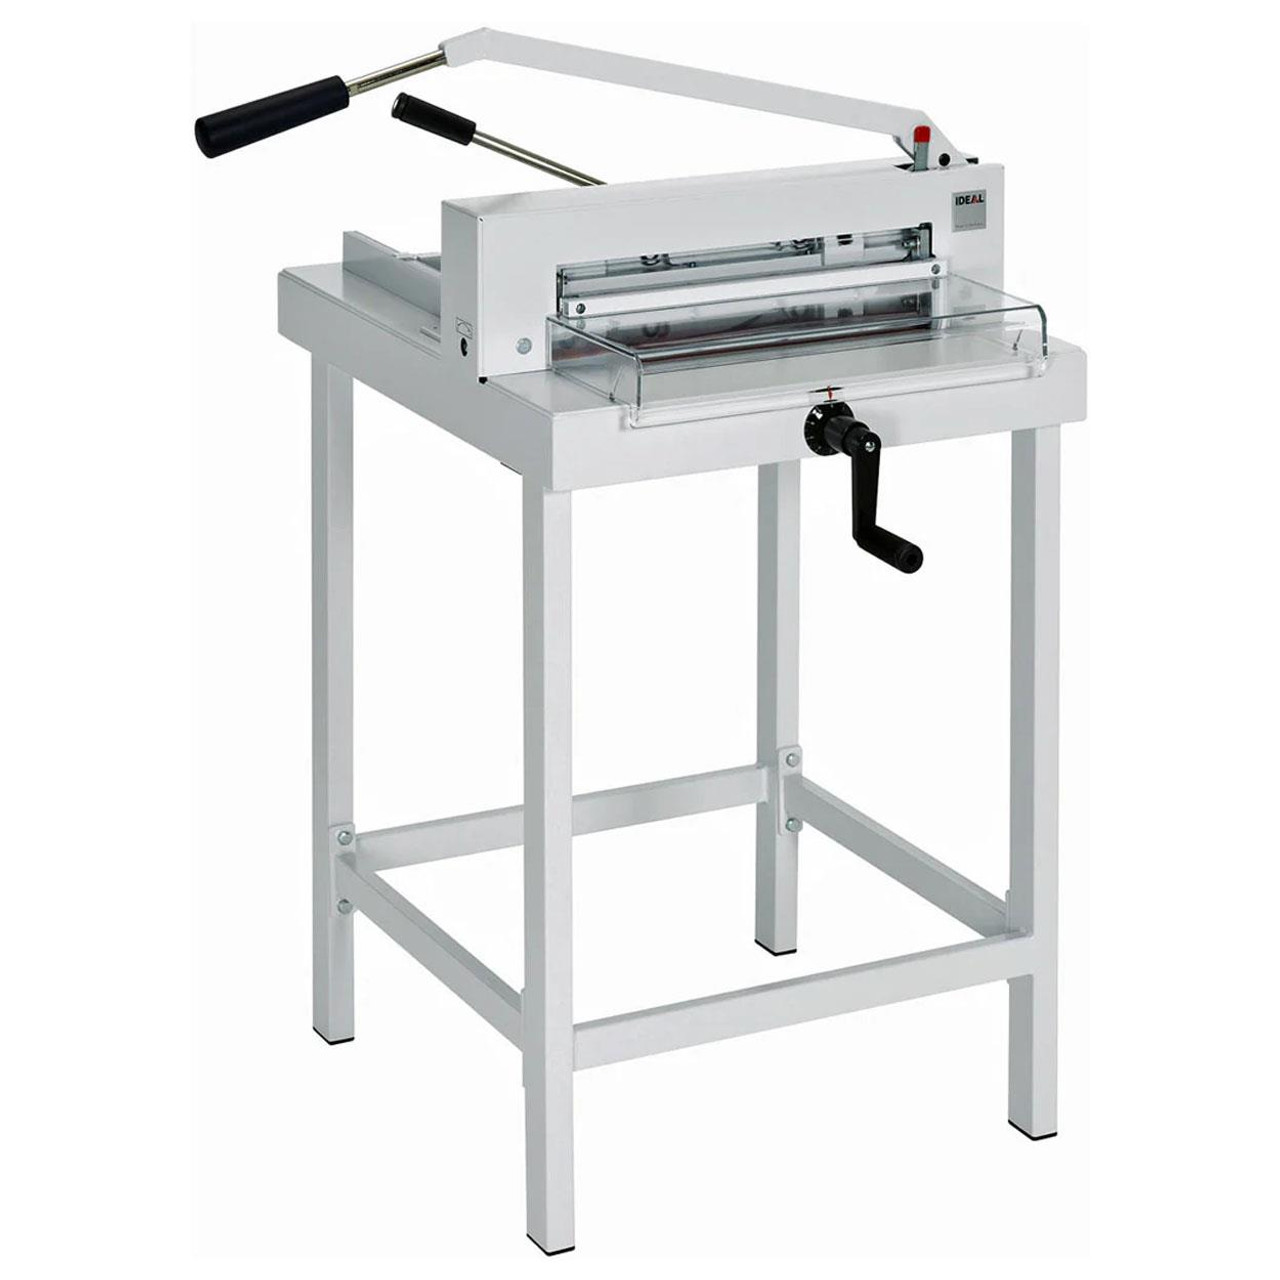 IDEAL 4305 Paper Guillotine